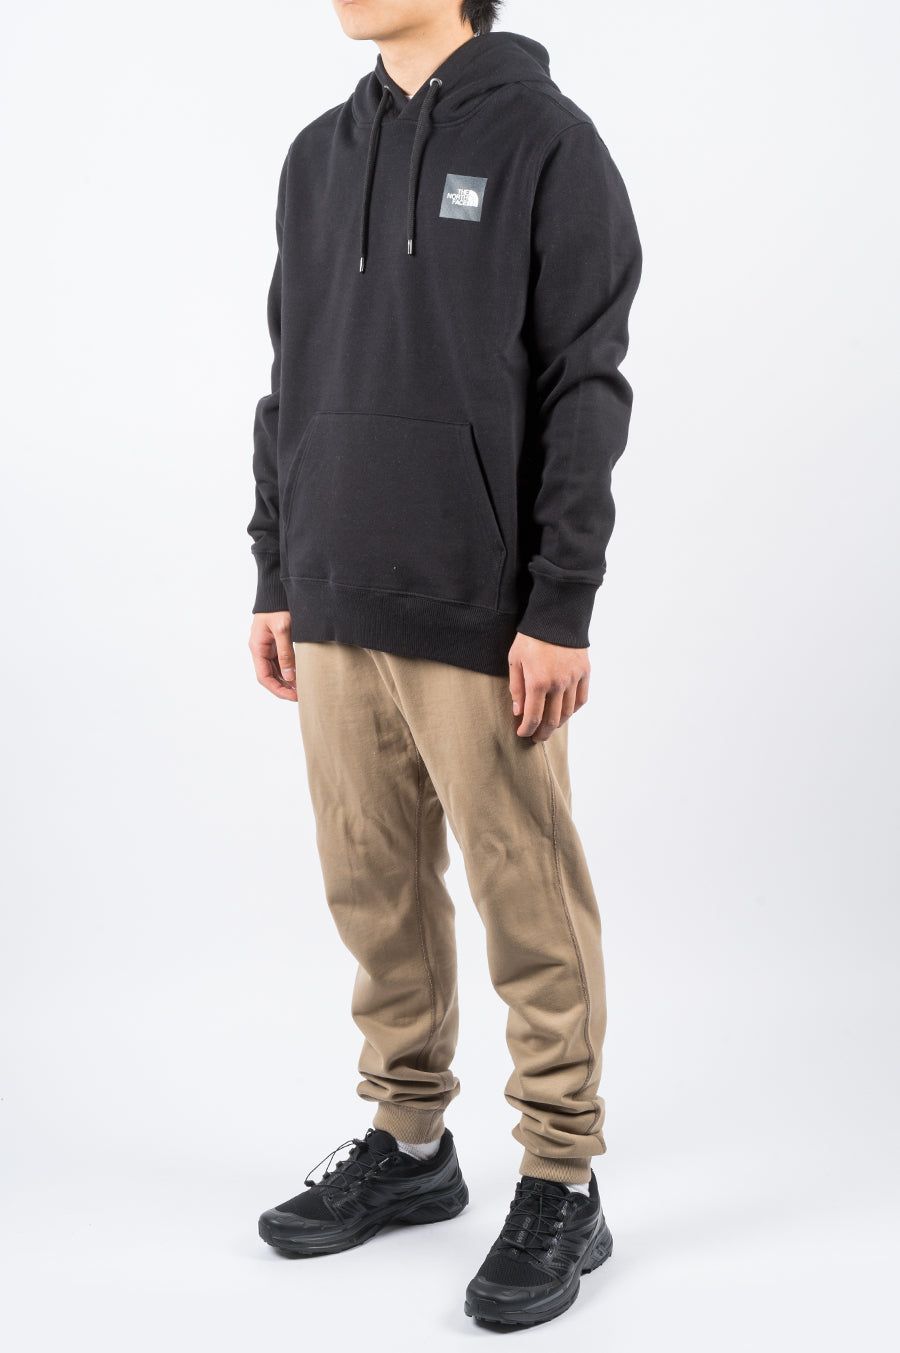 THE NORTH FACE 2.0 BOX PULLOVER HOODIE BLACK - BLENDS